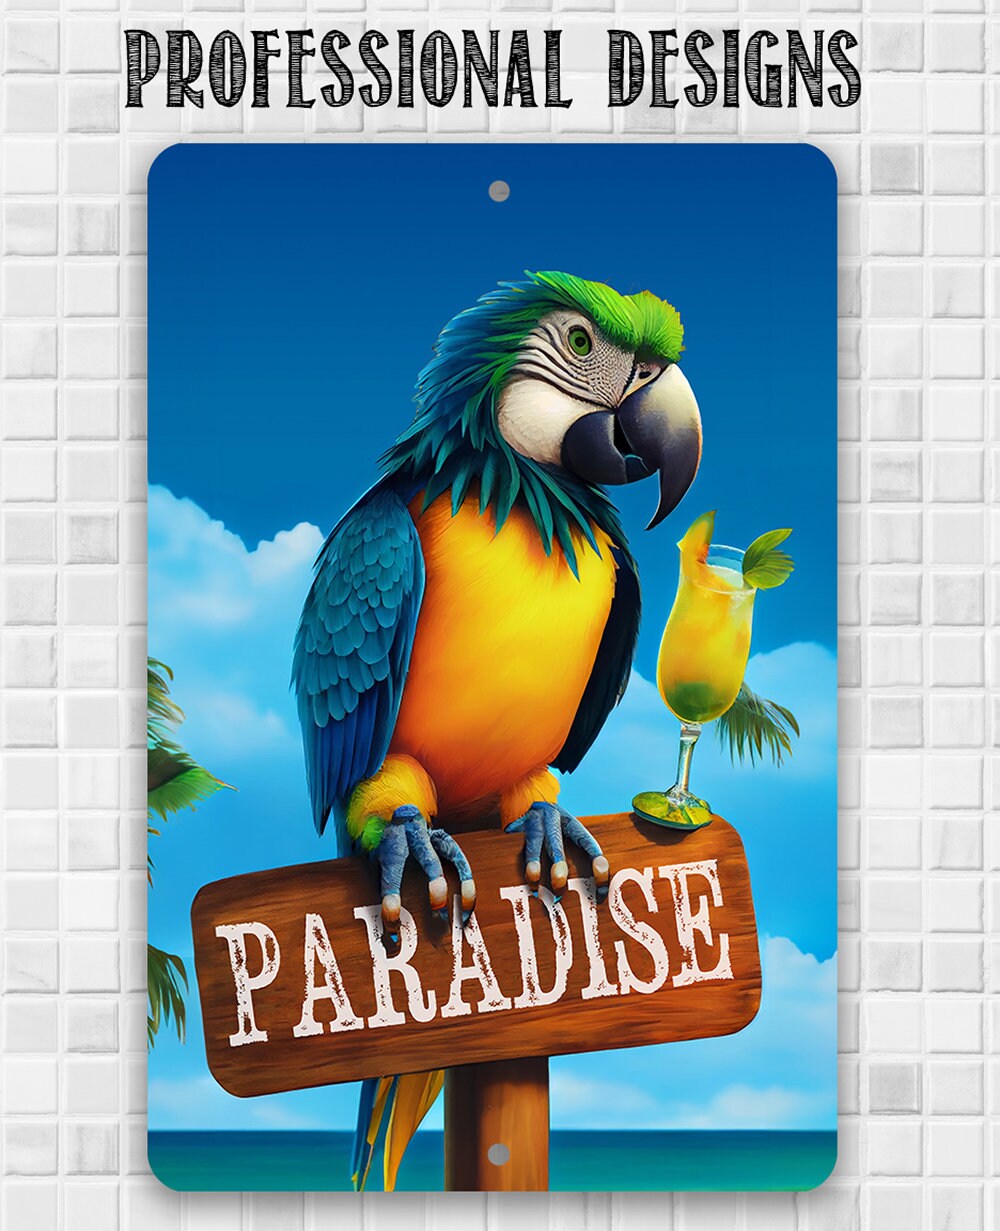 Metal Sign - Paradise Parrot - Durable Tin - 8"x12" / 12"x18" Use Indoor/Outdoor -Great Gift and Décor for Bar, Patio, Swimming Pool